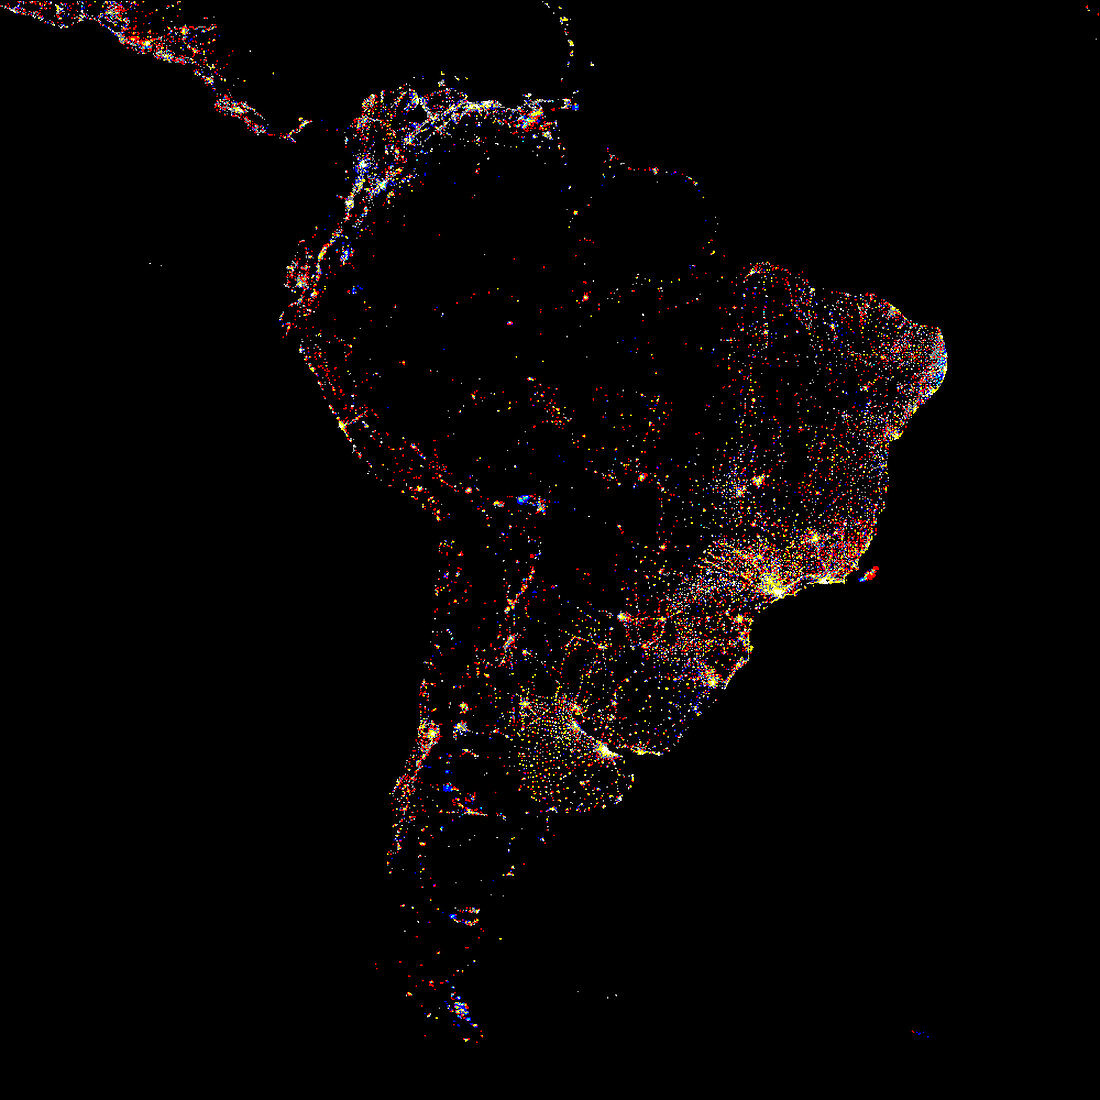 South America at night,1993-2003 changes